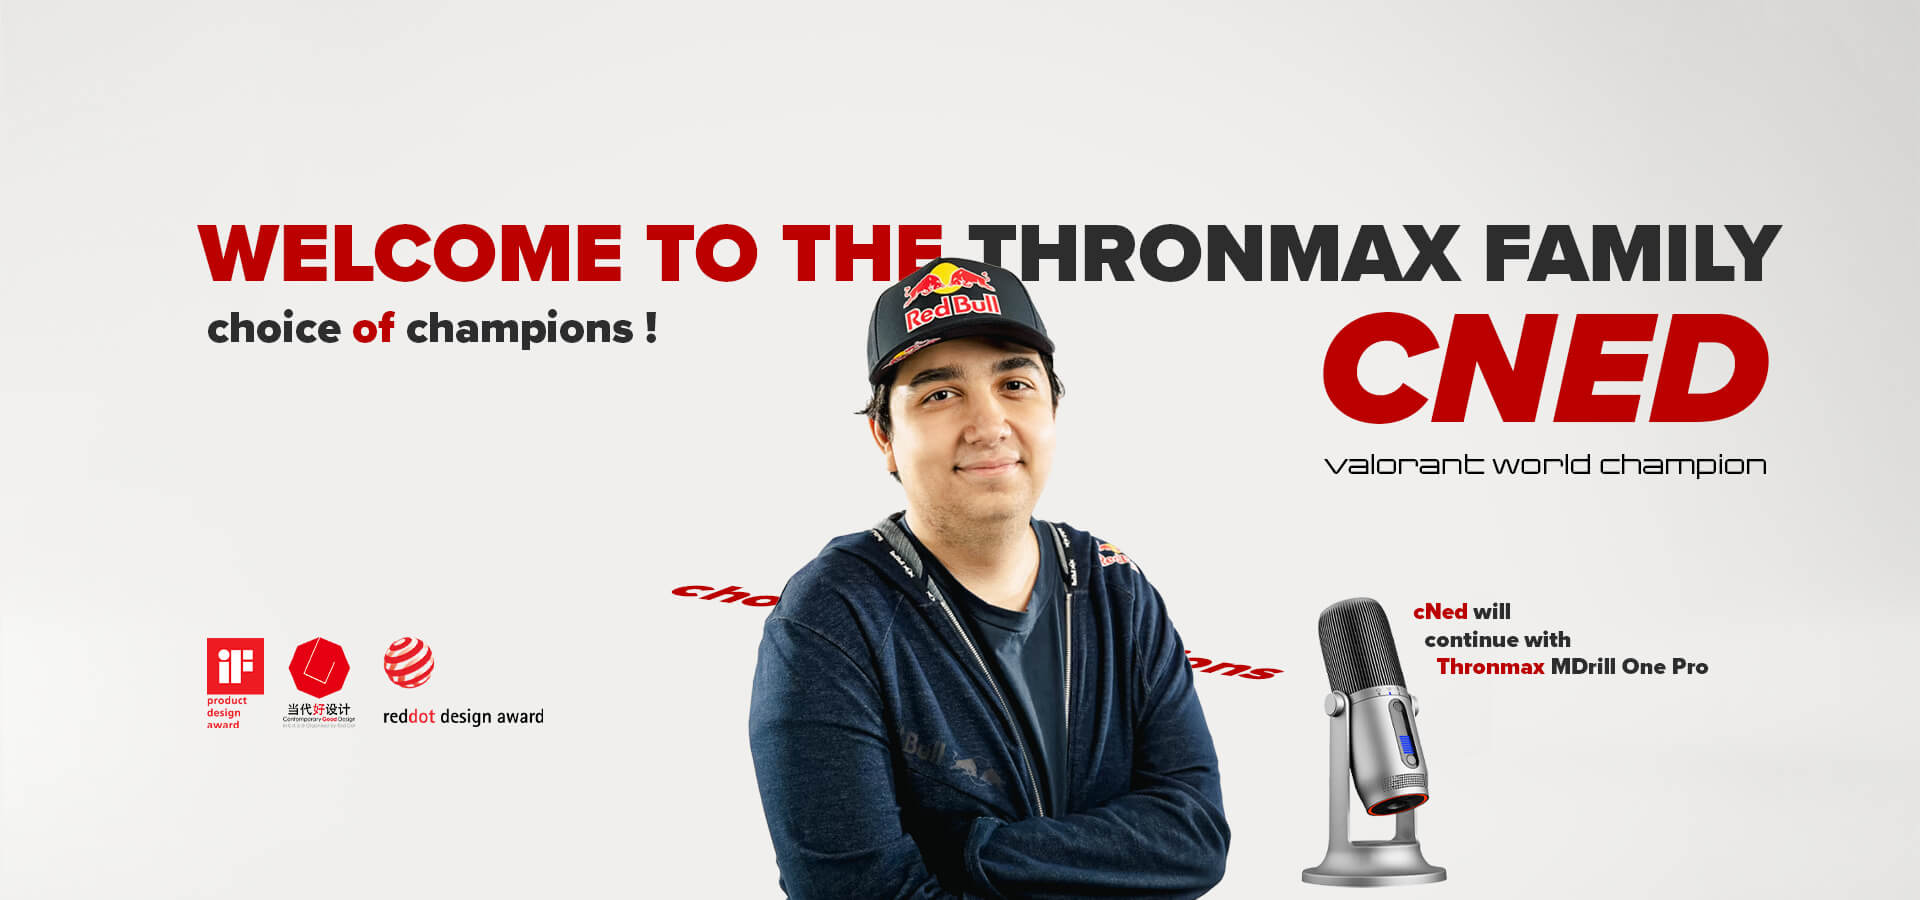 Valorant World Champion Joins The Thronmax Family